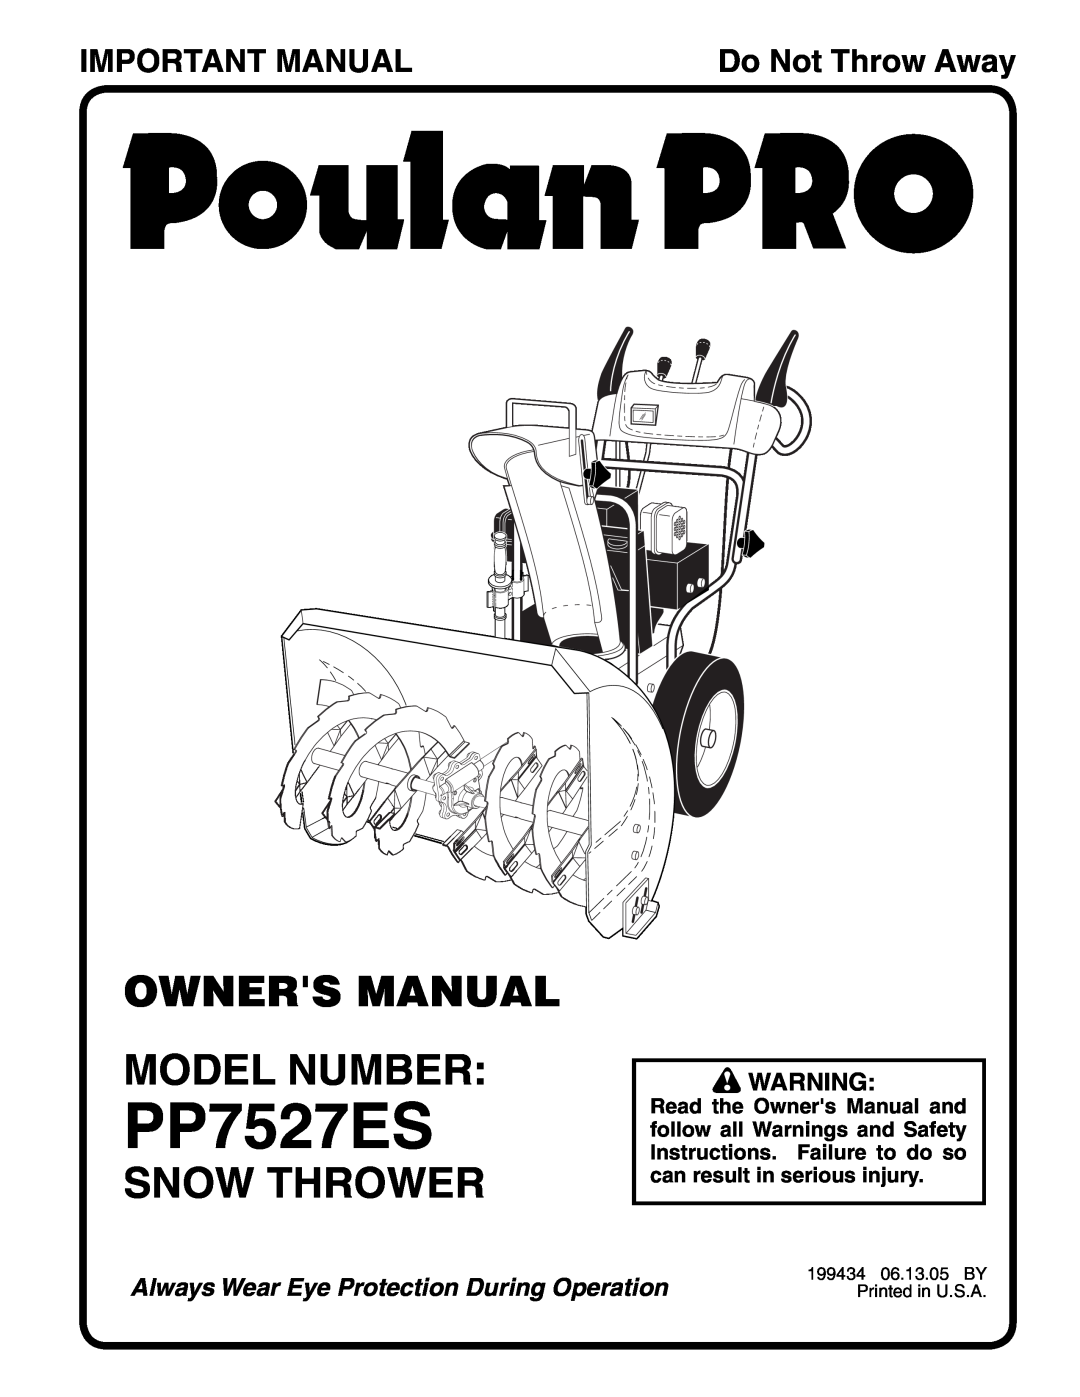 Poulan 199434 owner manual Snow Thrower, Important Manual, PP7527ES, Do Not Throw Away 